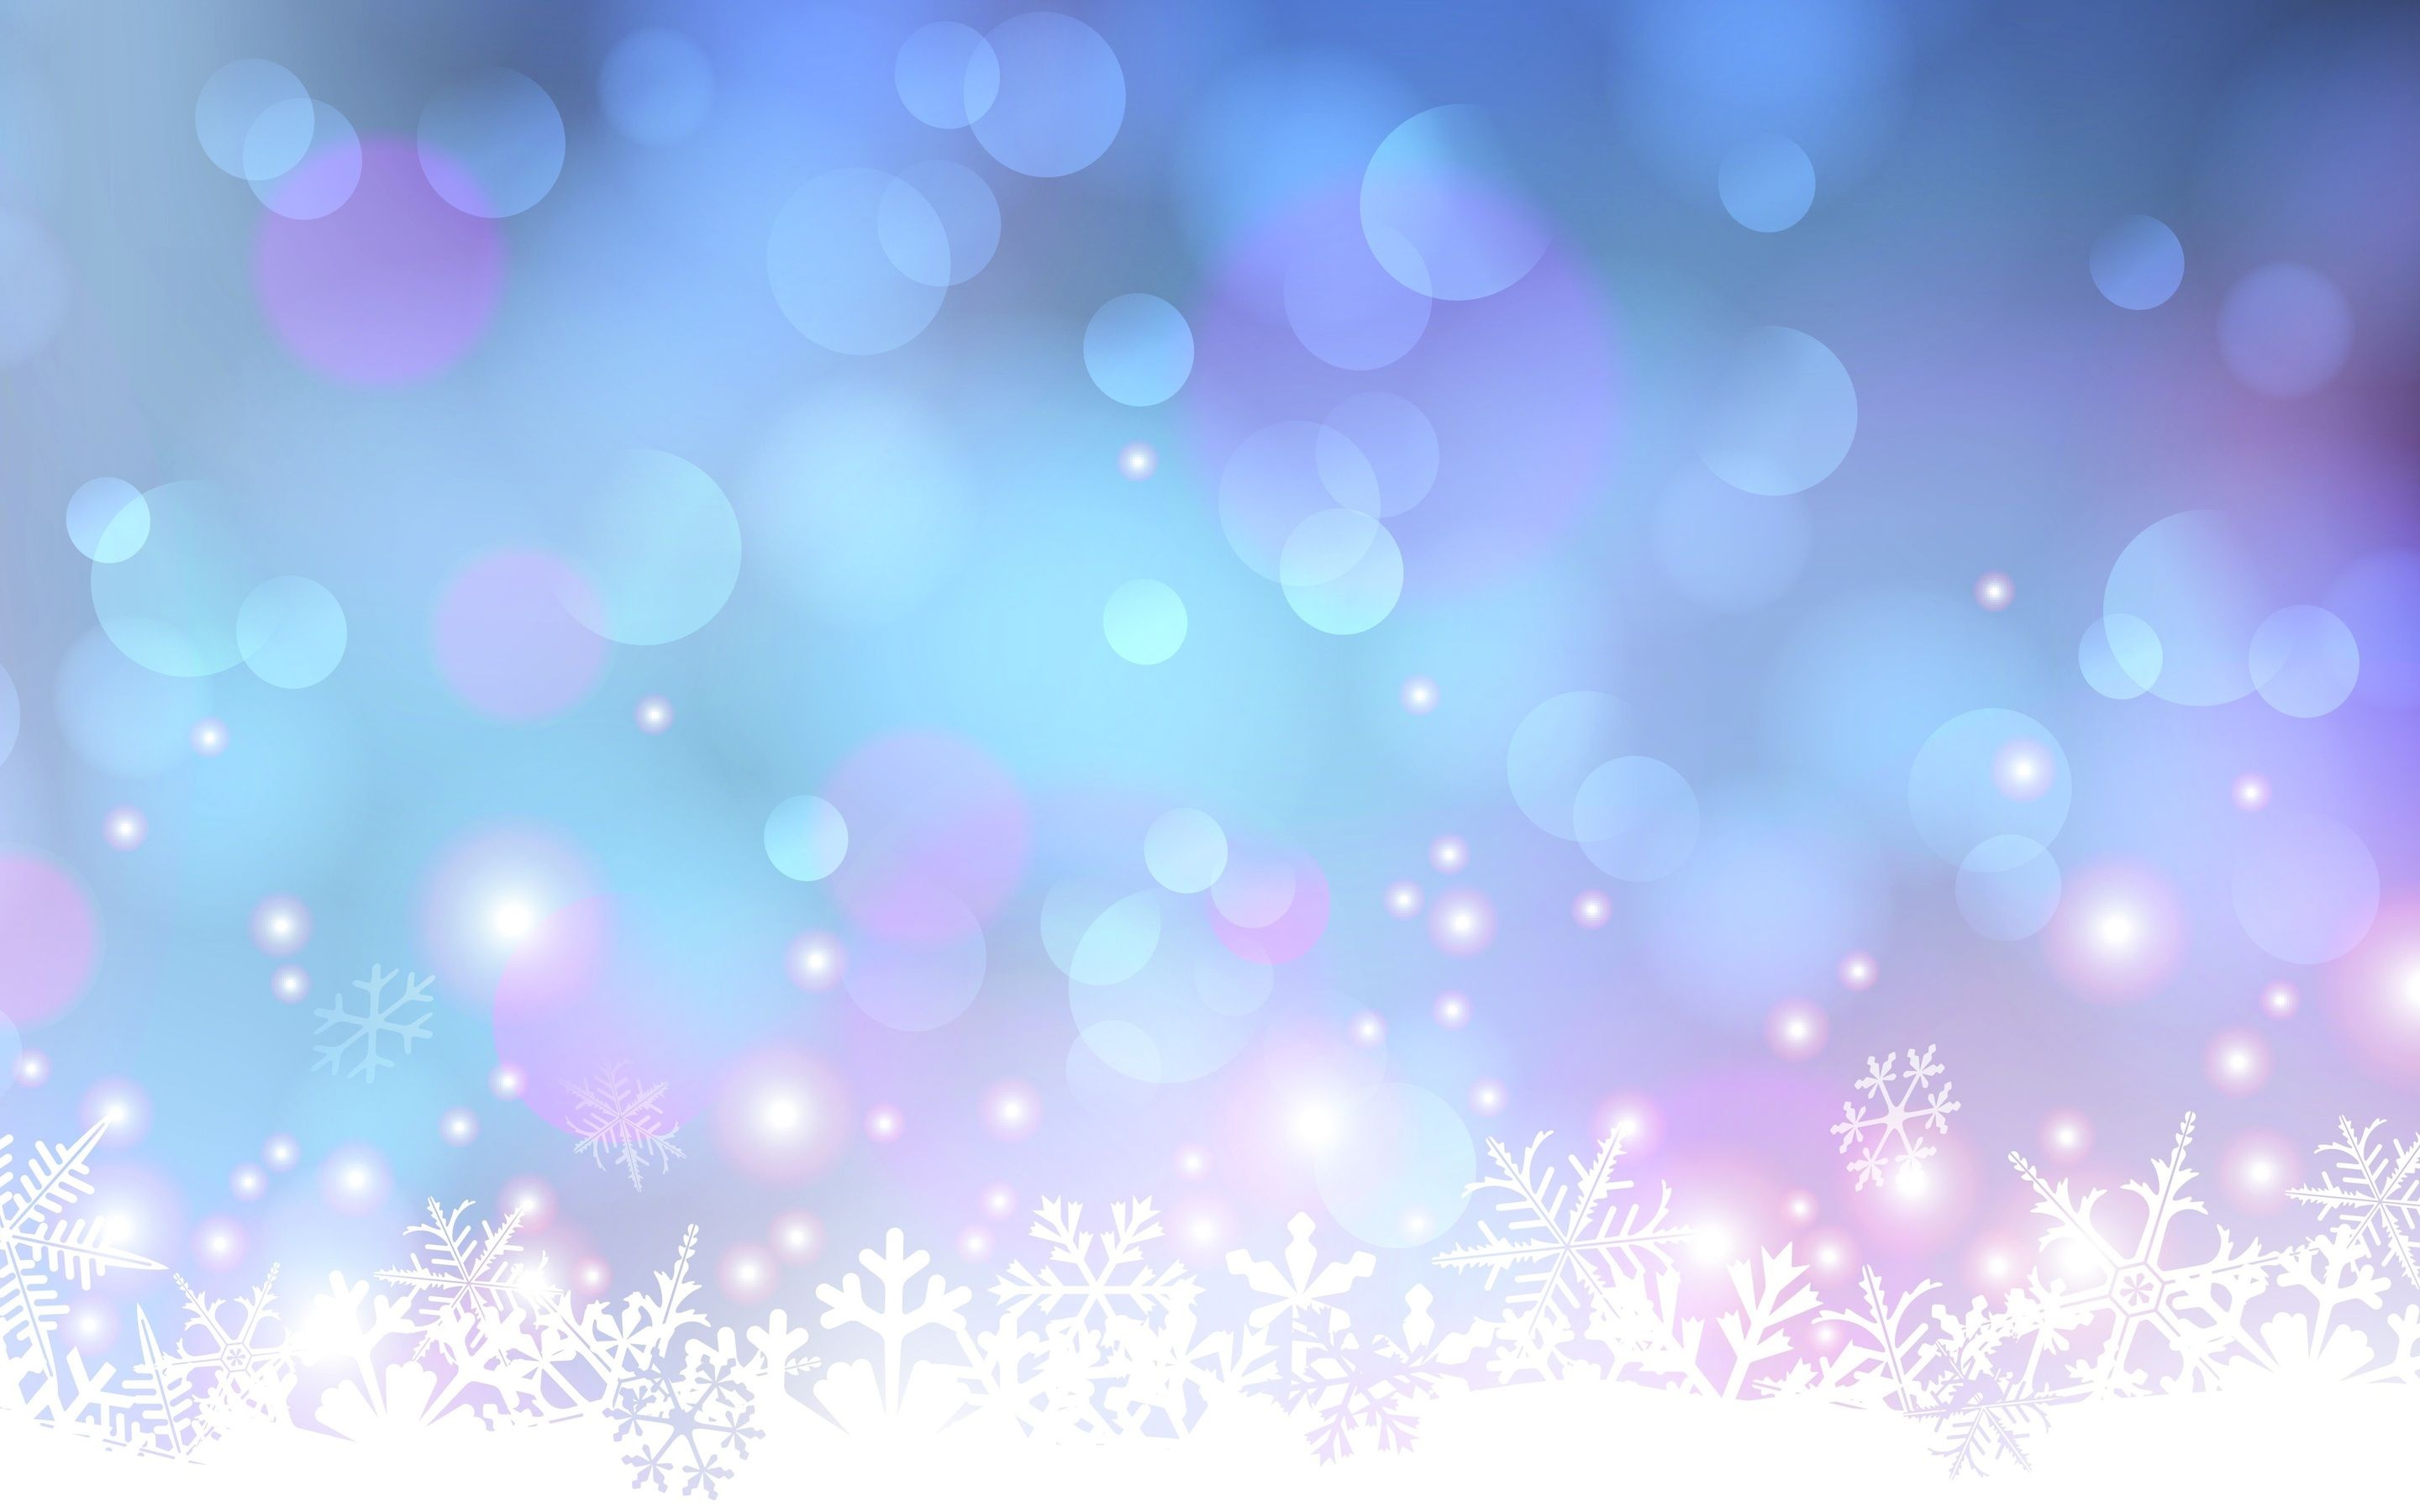 Christmas backgrounds - wallpapers, photos, pictures, images |